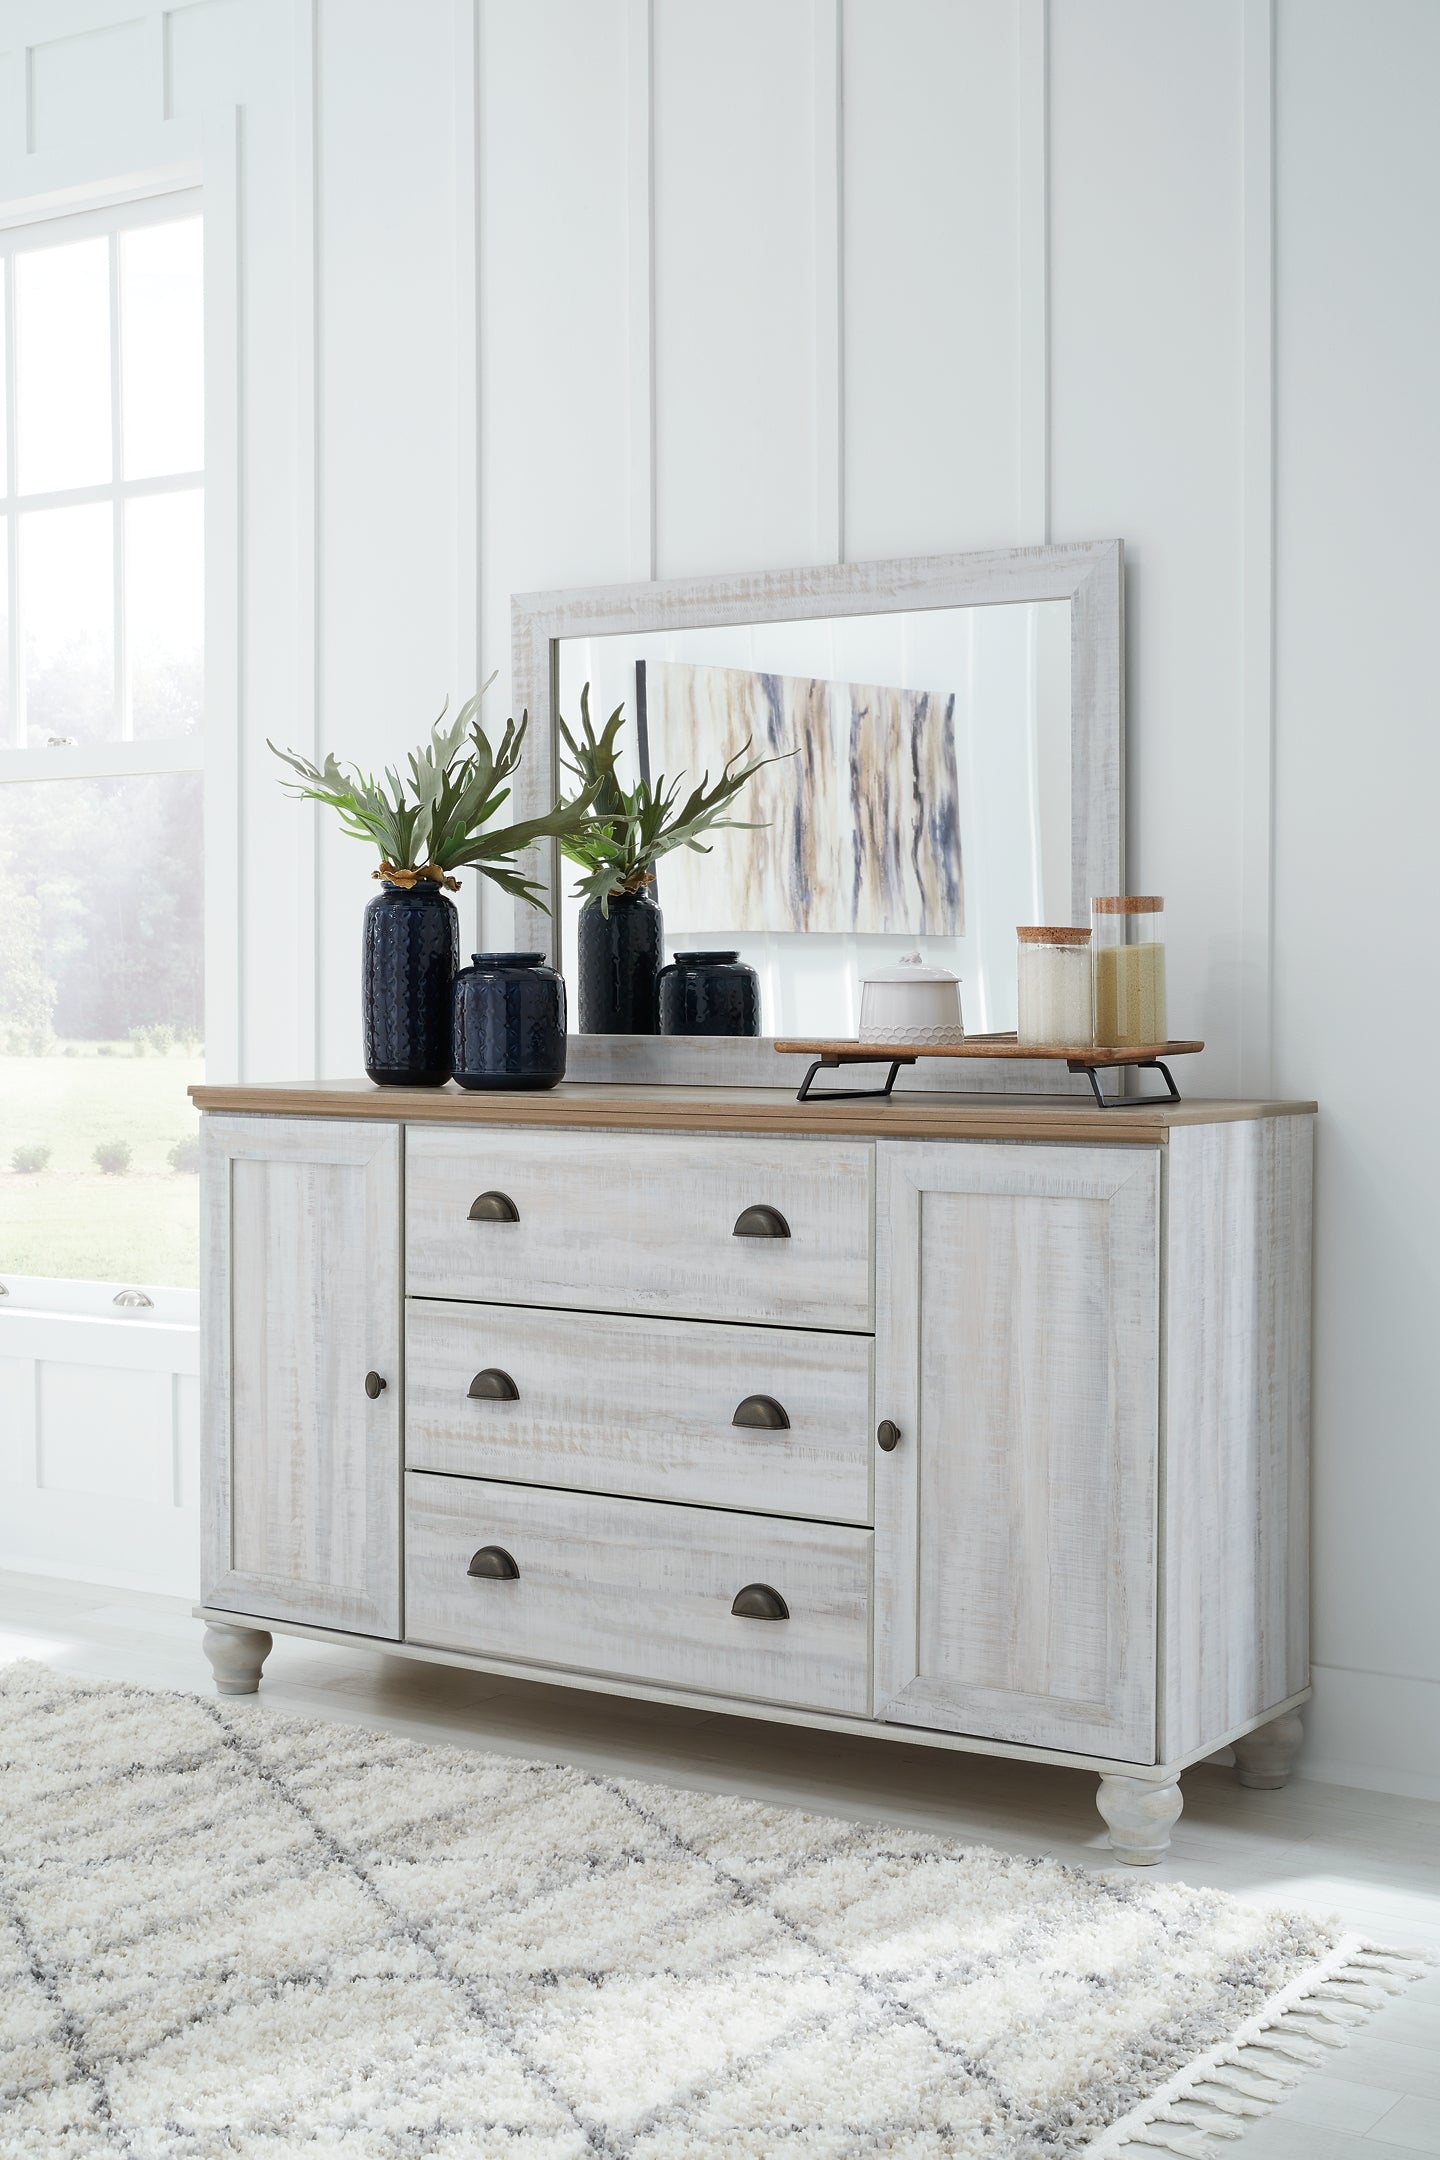 Haven Bay Full Panel Bed with Mirrored Dresser